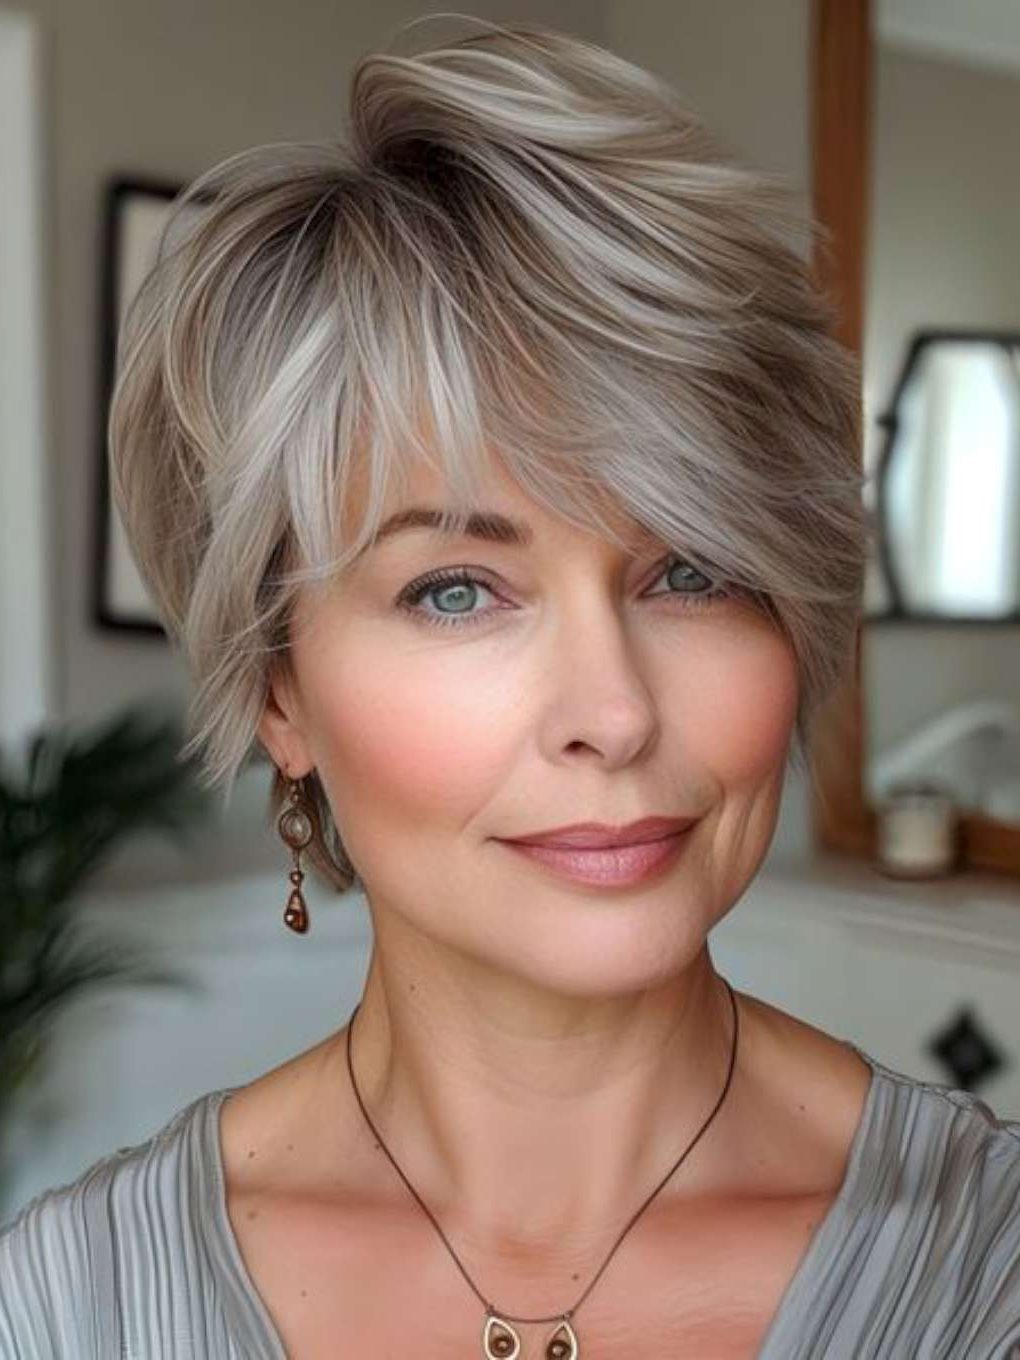 The Latest Trends in Short Hairstyles for Women - 4